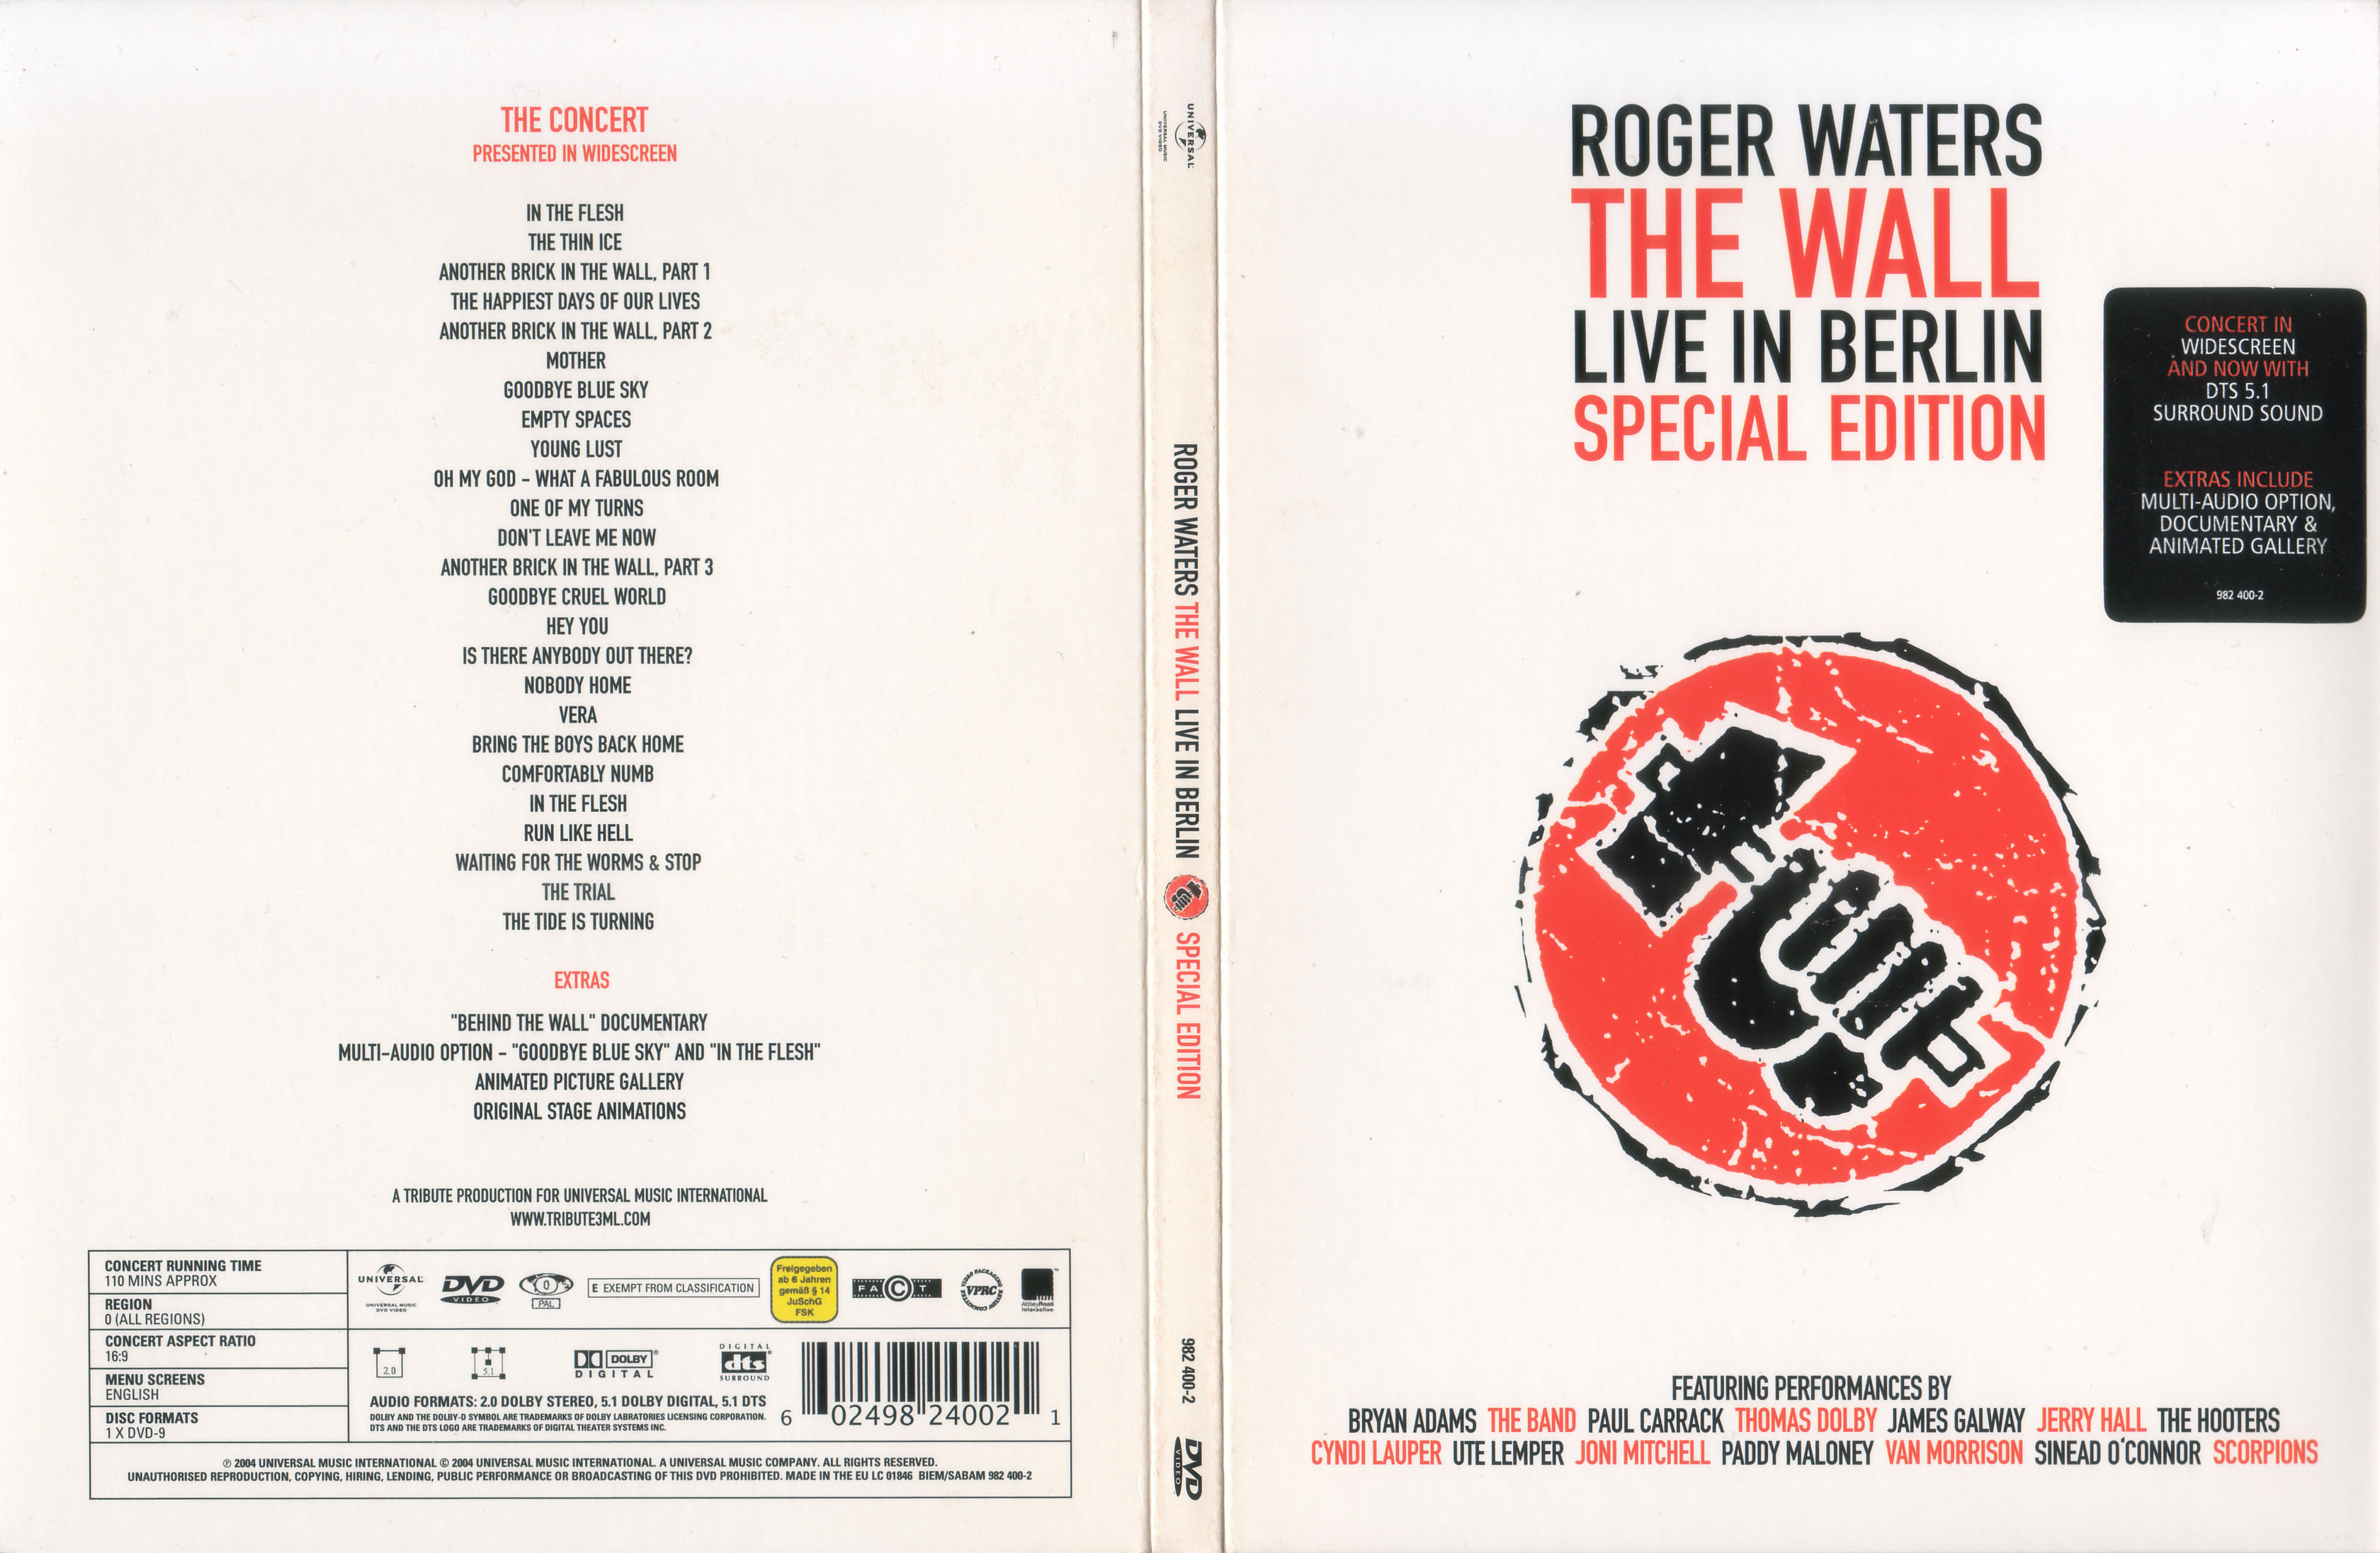 Jaquette DVD Roger Waters The Wall live in Berlin